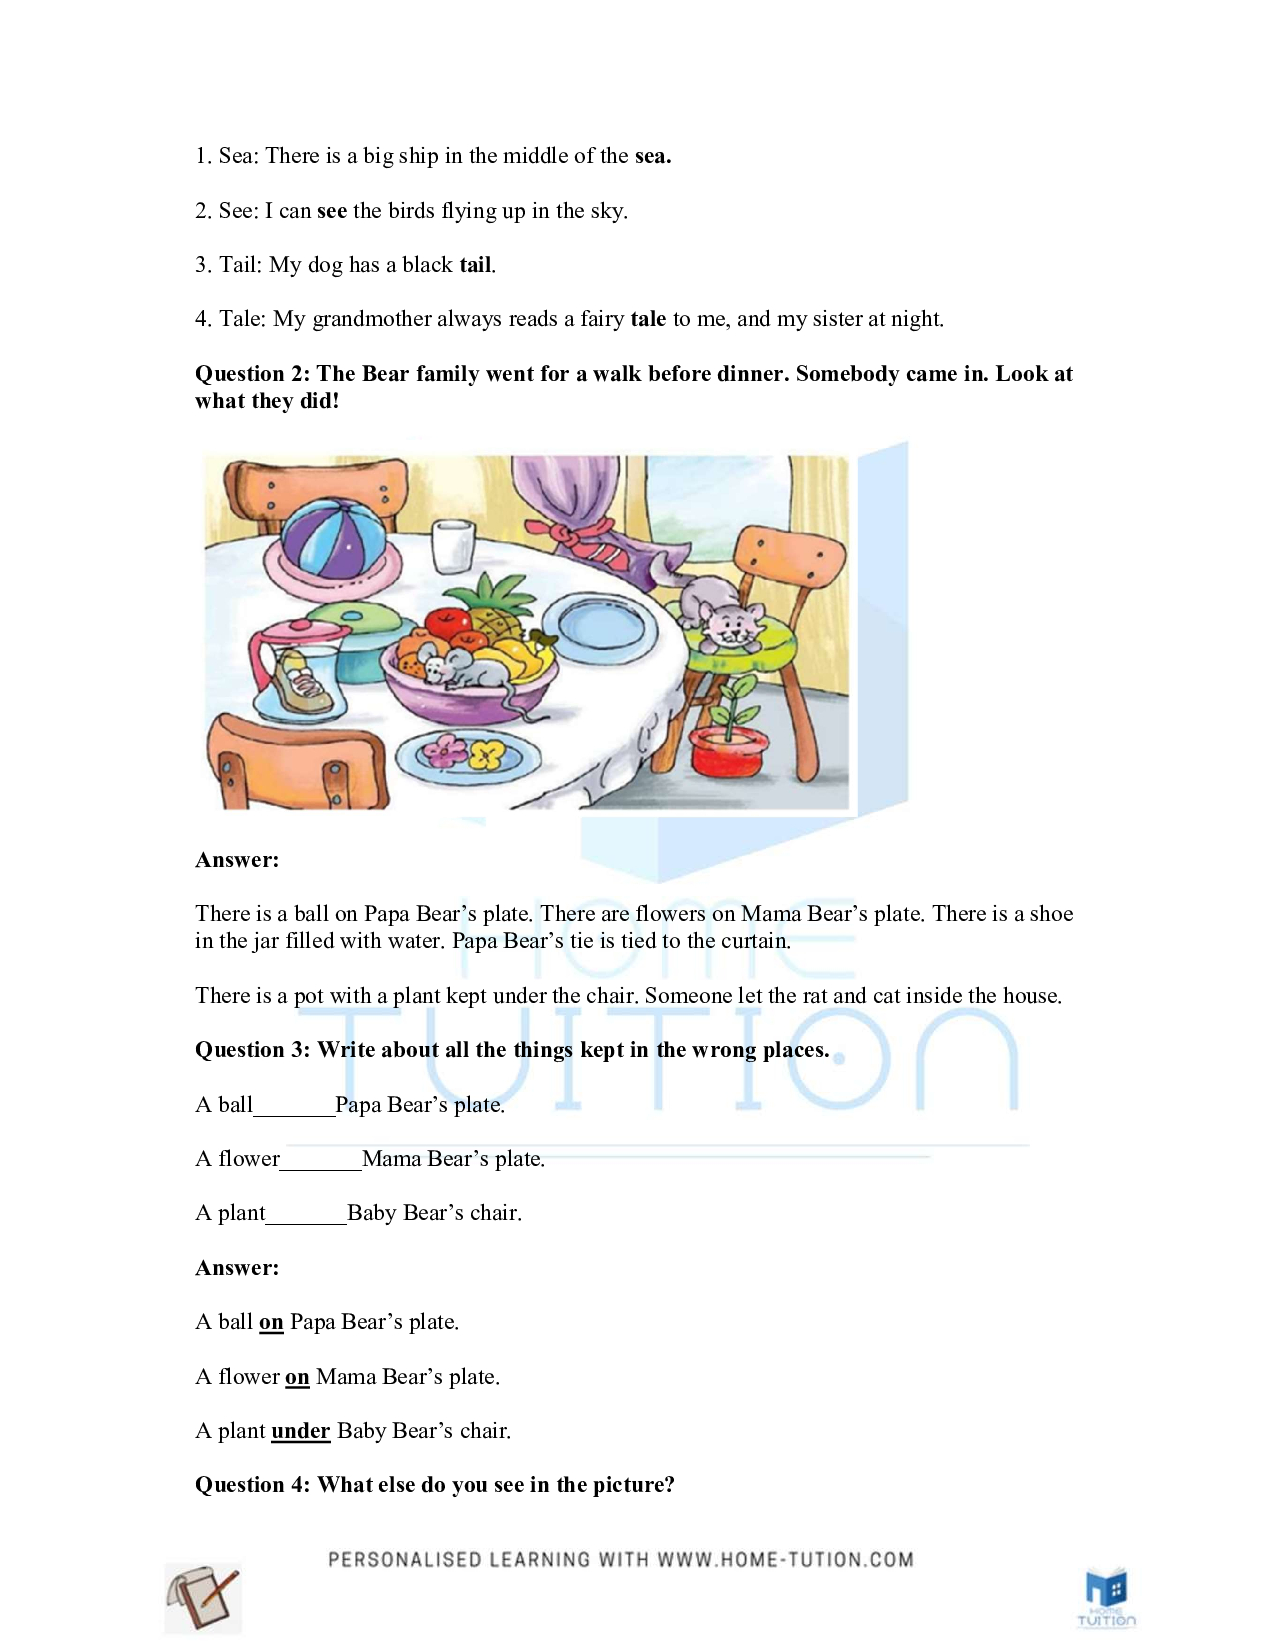 NCERT Solutions for Class 2 English Curlylocks and the Three Bears